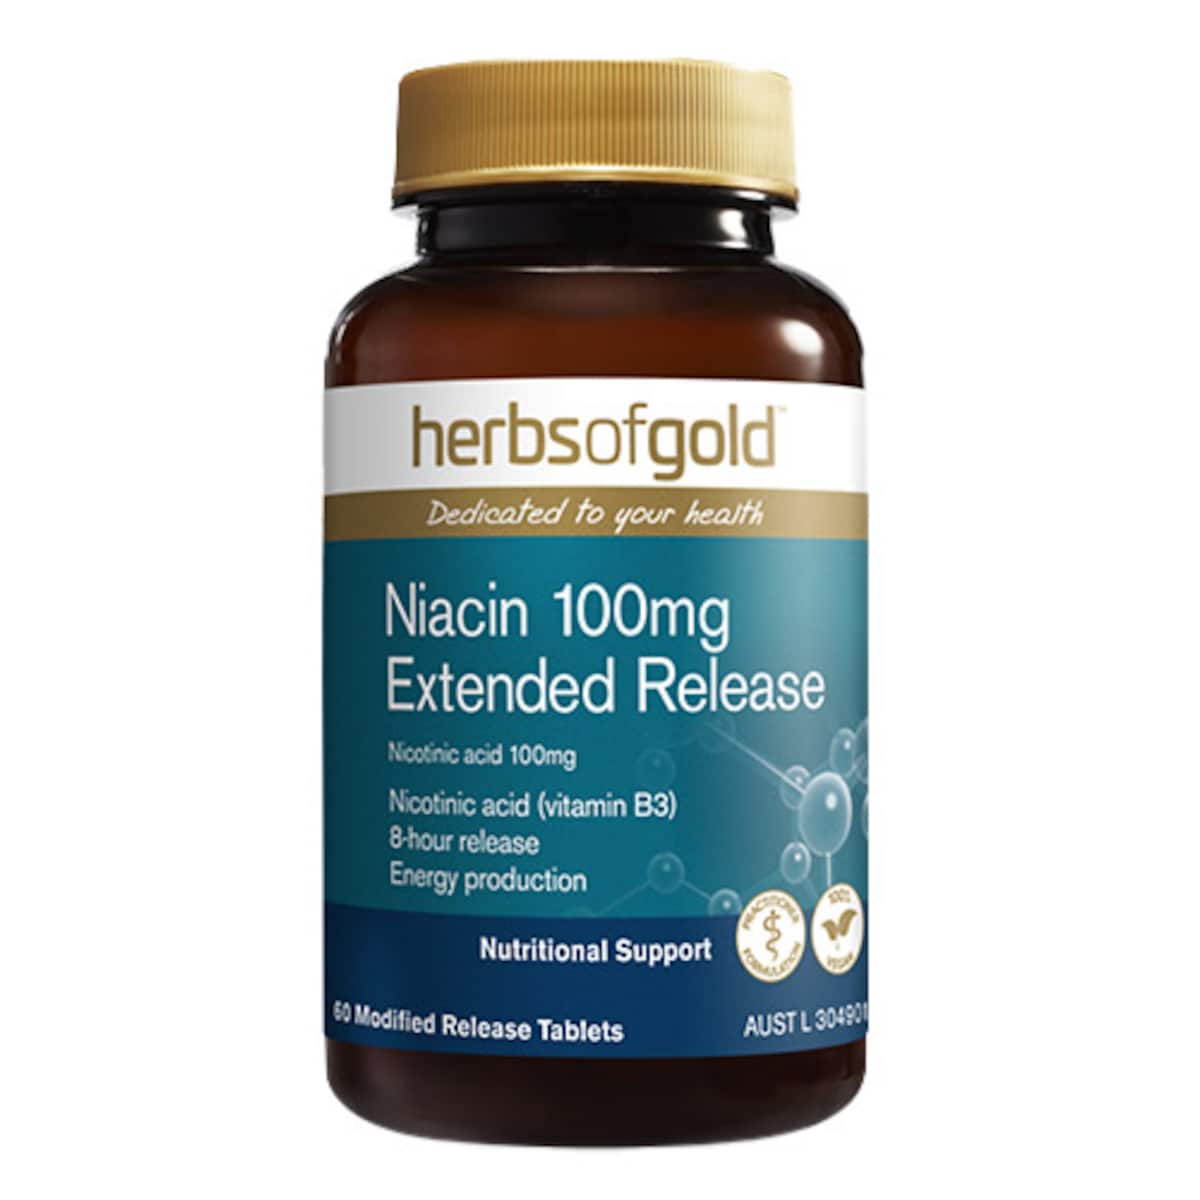 Herbs of Gold Niacin 100mg Extended Release 60 Tablets Australia